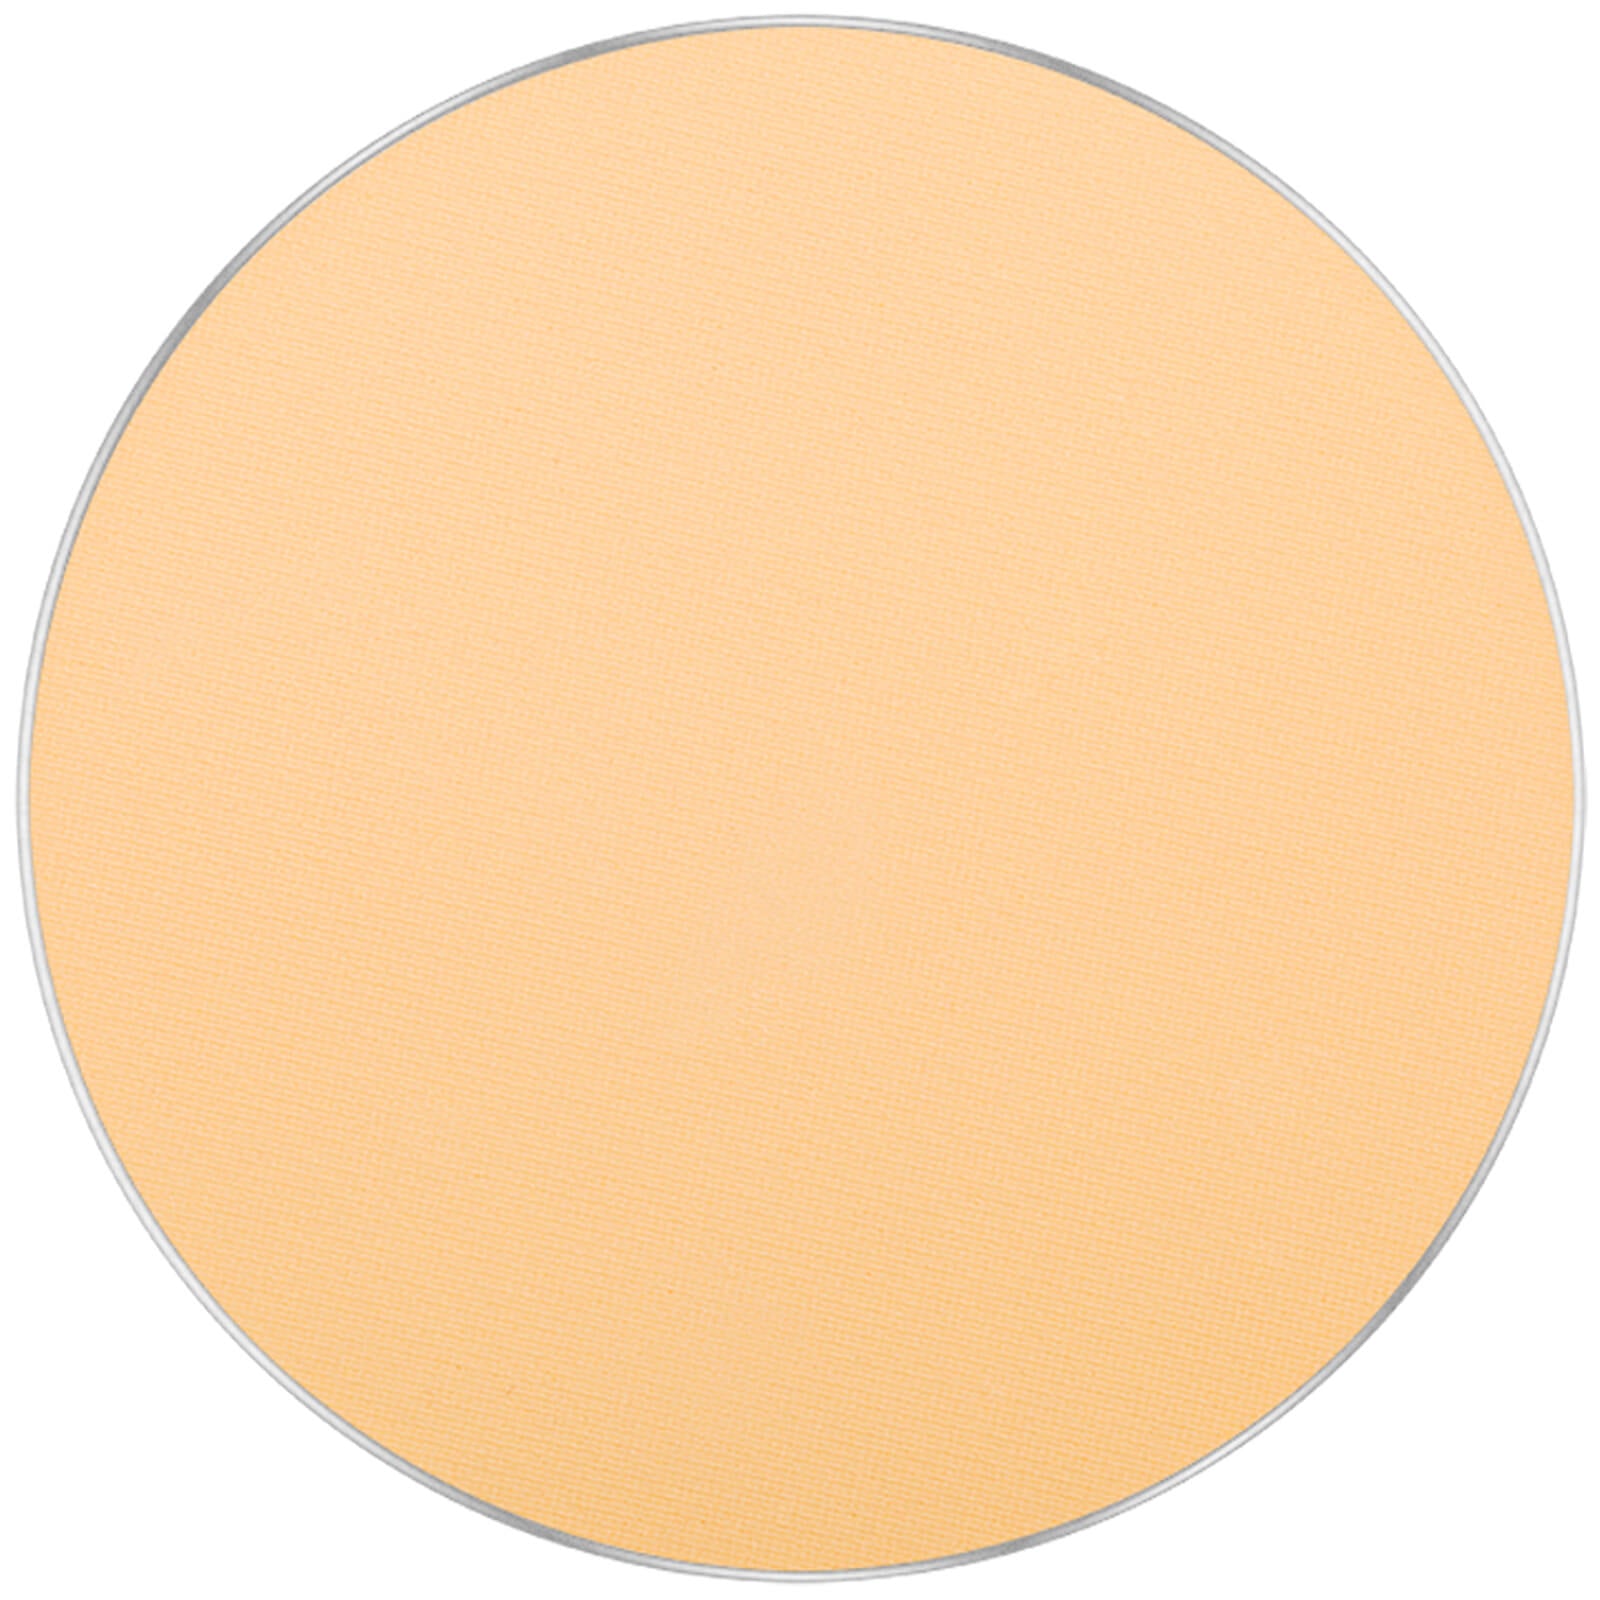 Inglot Freedom System HD Pressed Powder Round - Give Us Beauty